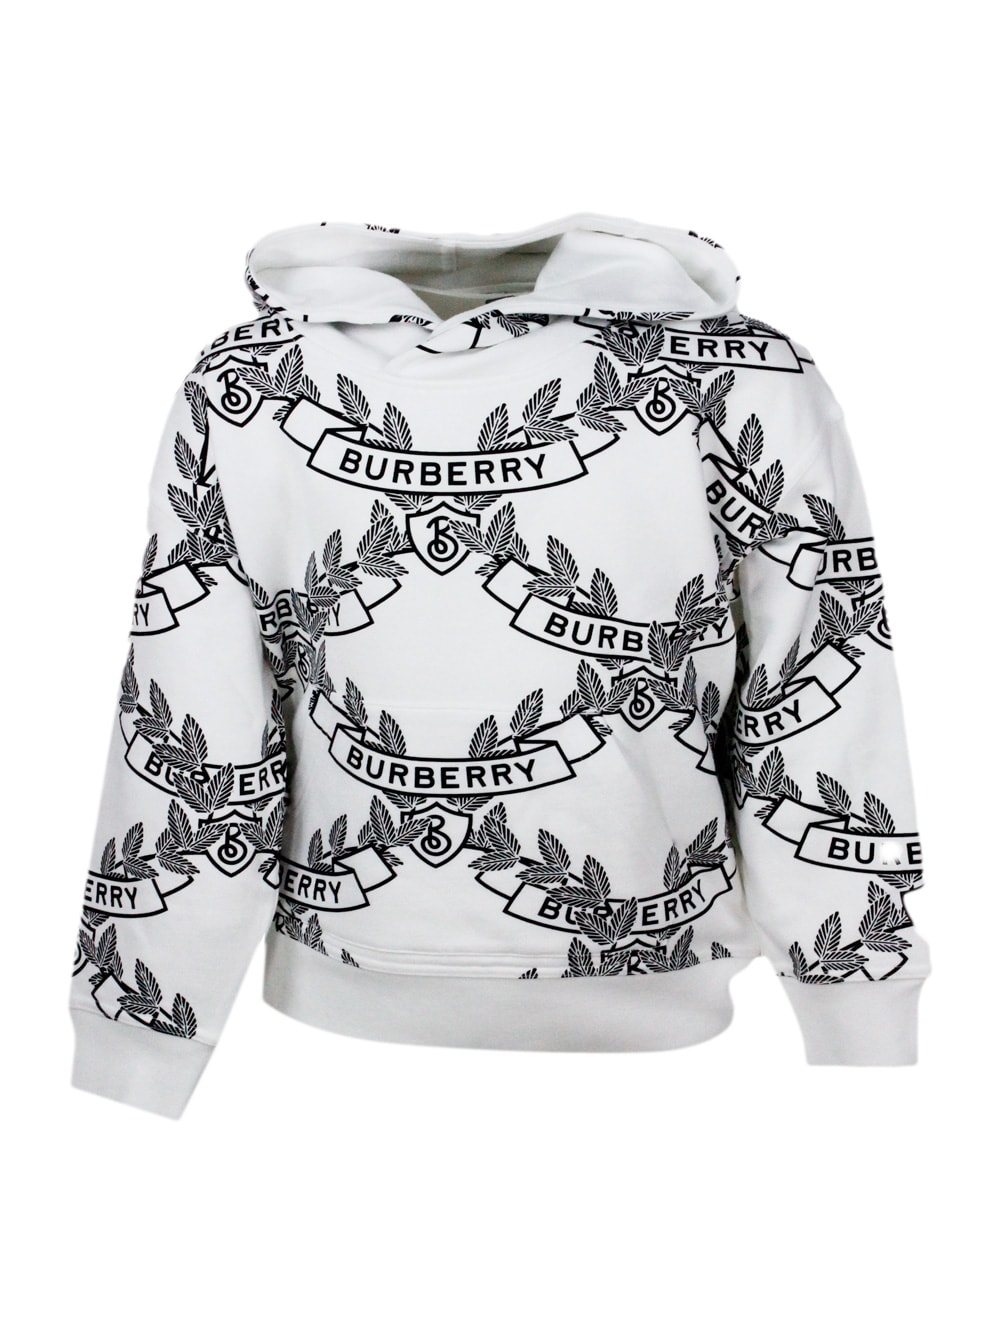 Burberry Rocky Crewneck Sweatshirt With Hood In Cotton Jersey With Logo Lettering Prints